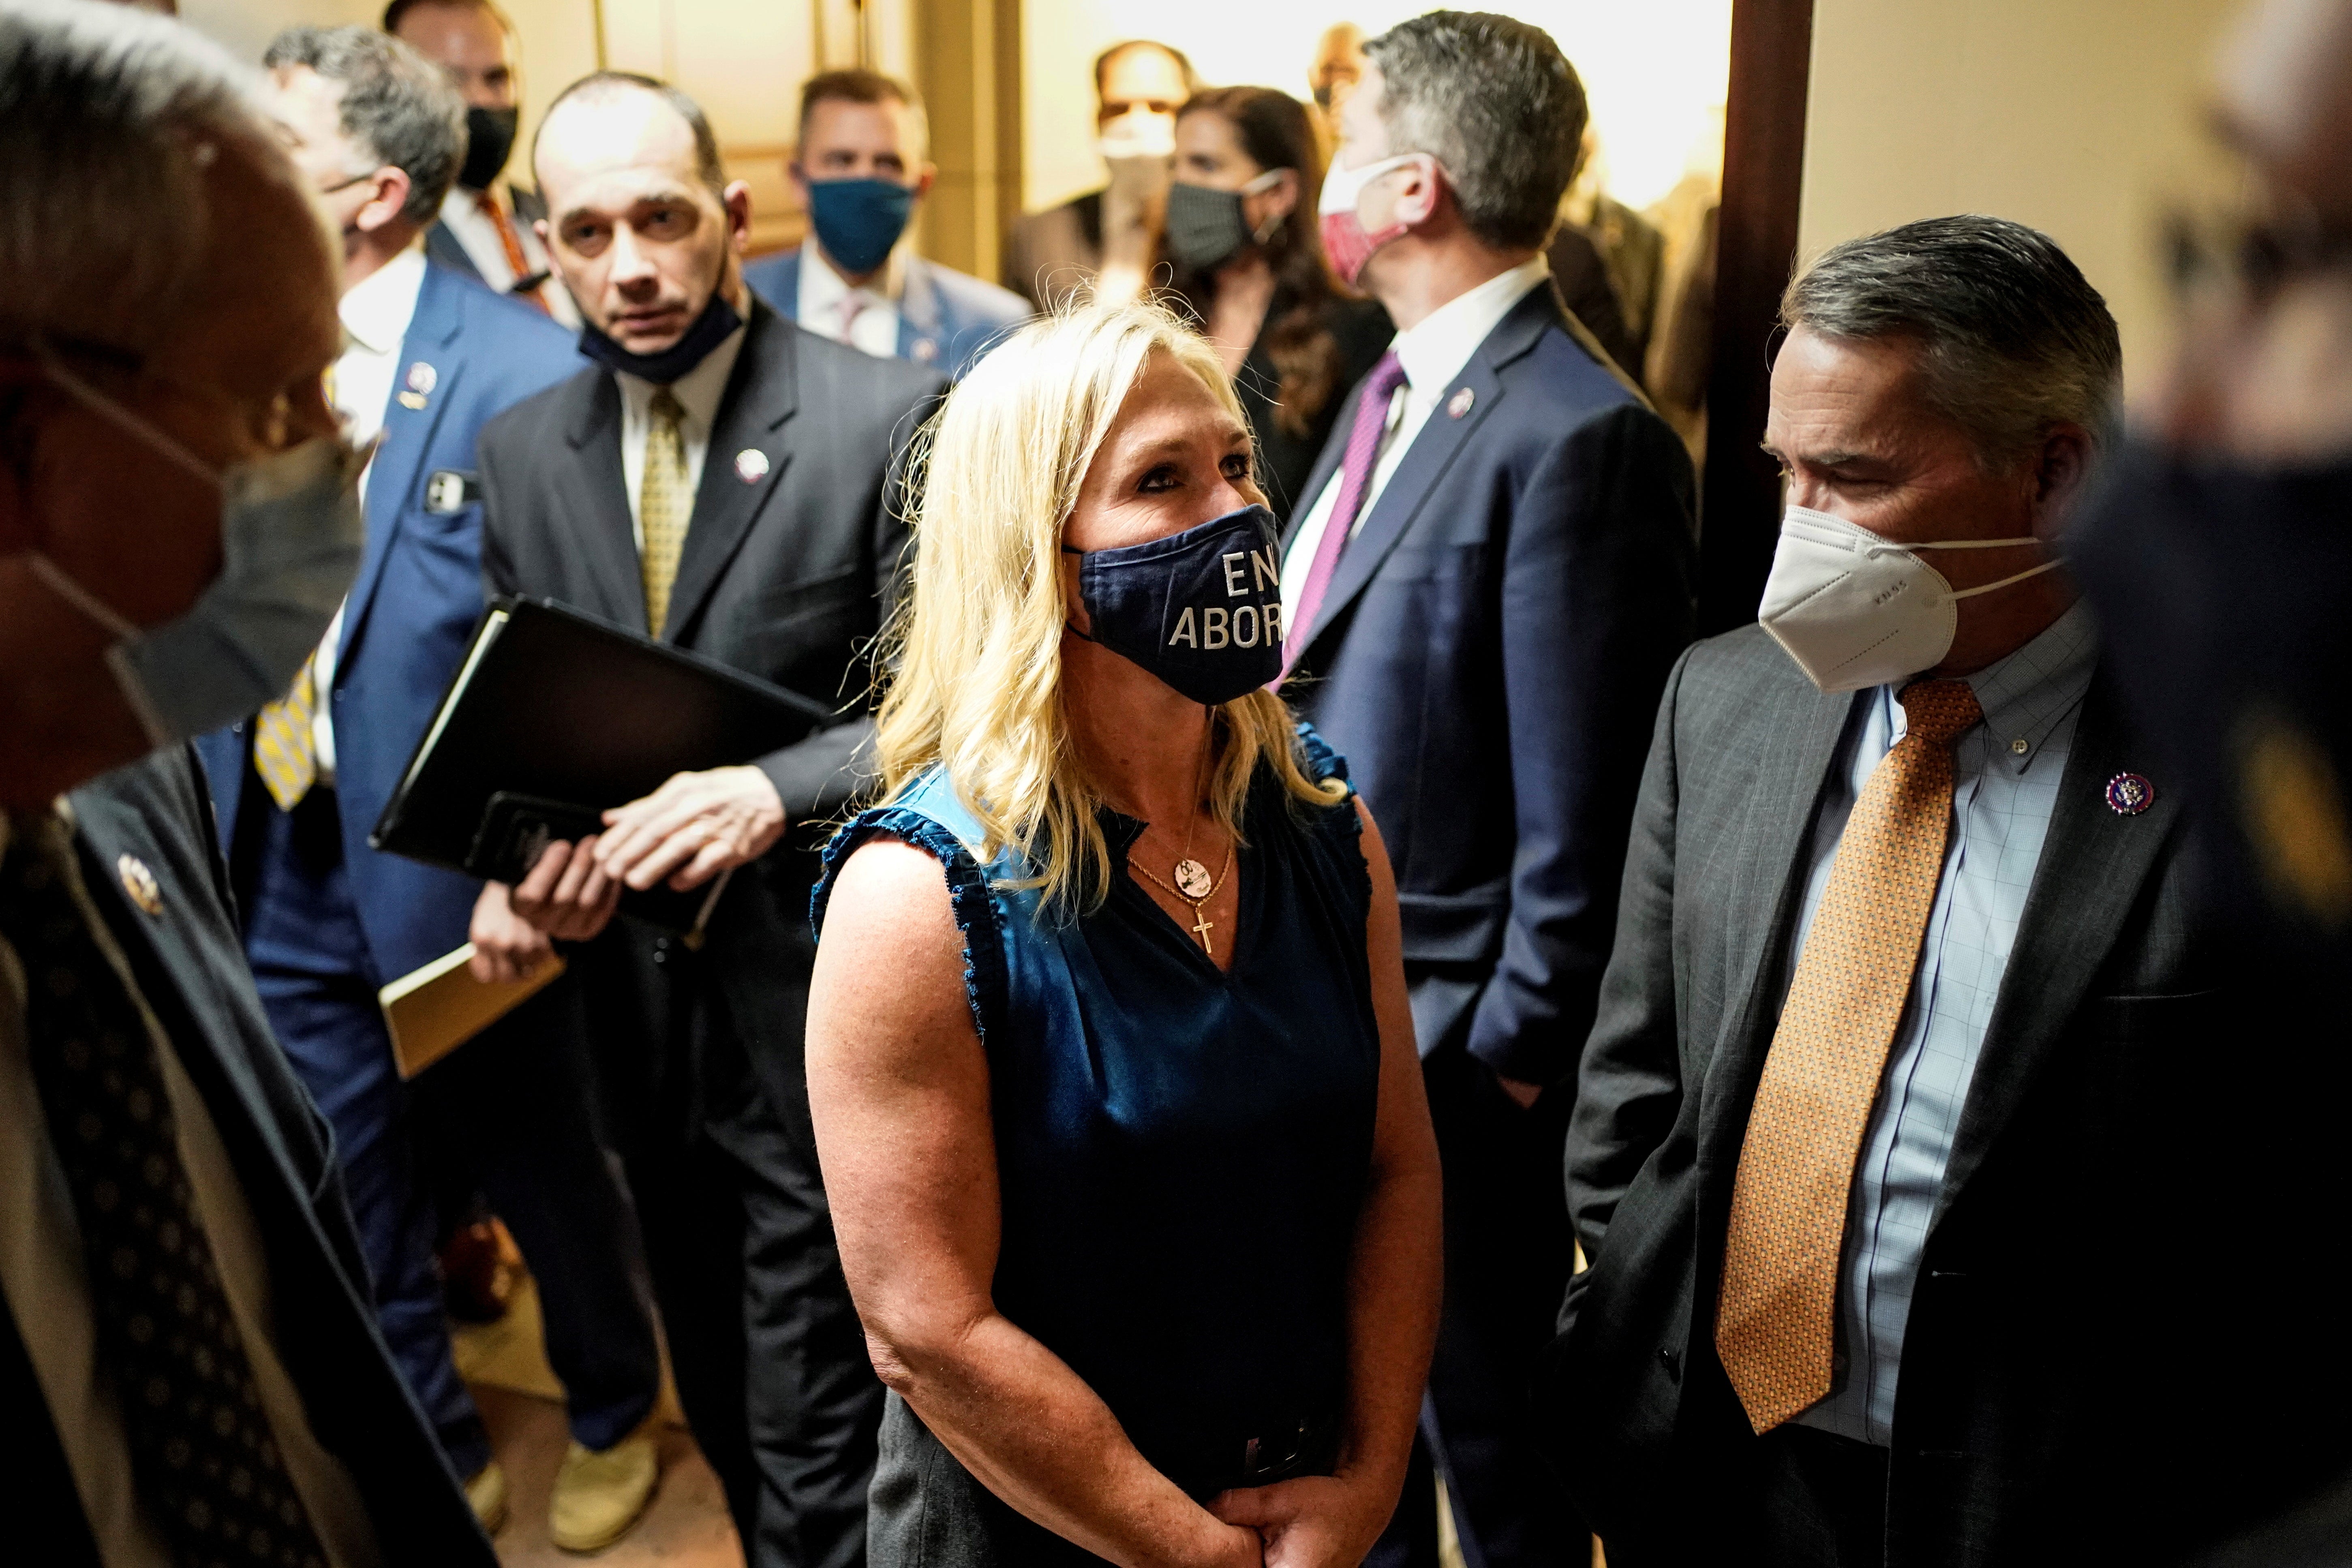 Marjorie Taylor Greene (R-GA) departs after a House Republican Caucus meeting on Capitol Hill in Washington, U.S., February 3, 2021